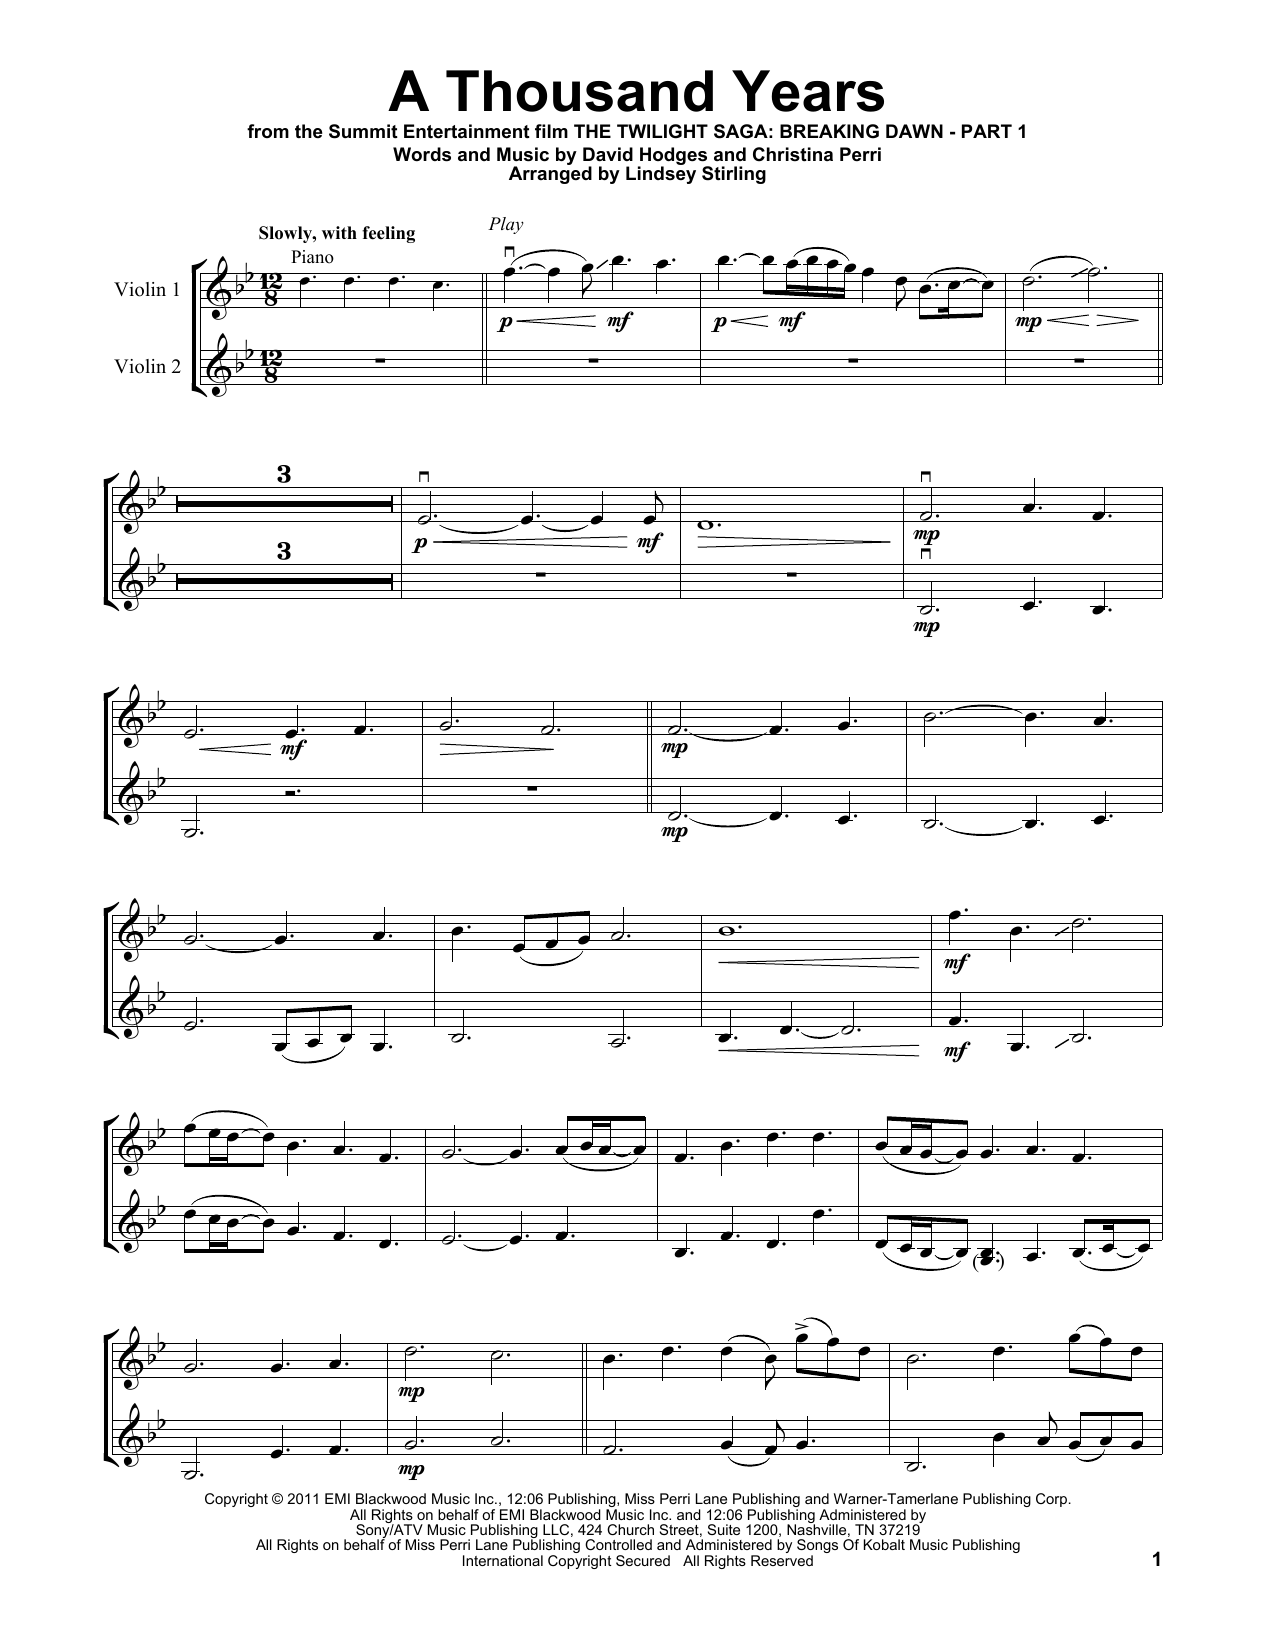 Download Lindsey Stirling A Thousand Years Sheet Music